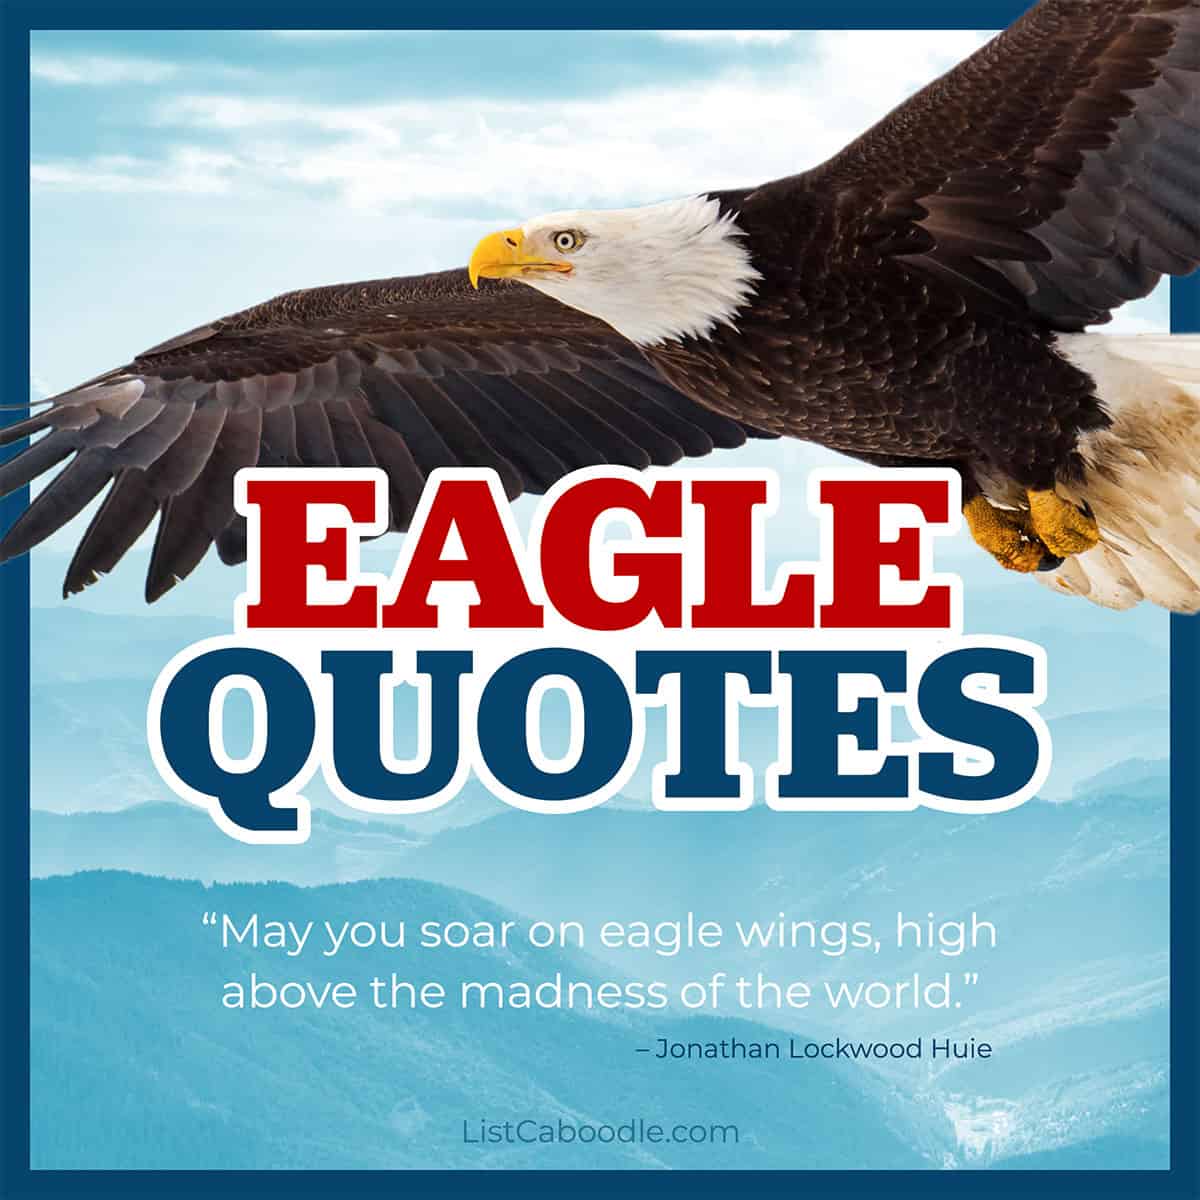 eagle quotes and sayings